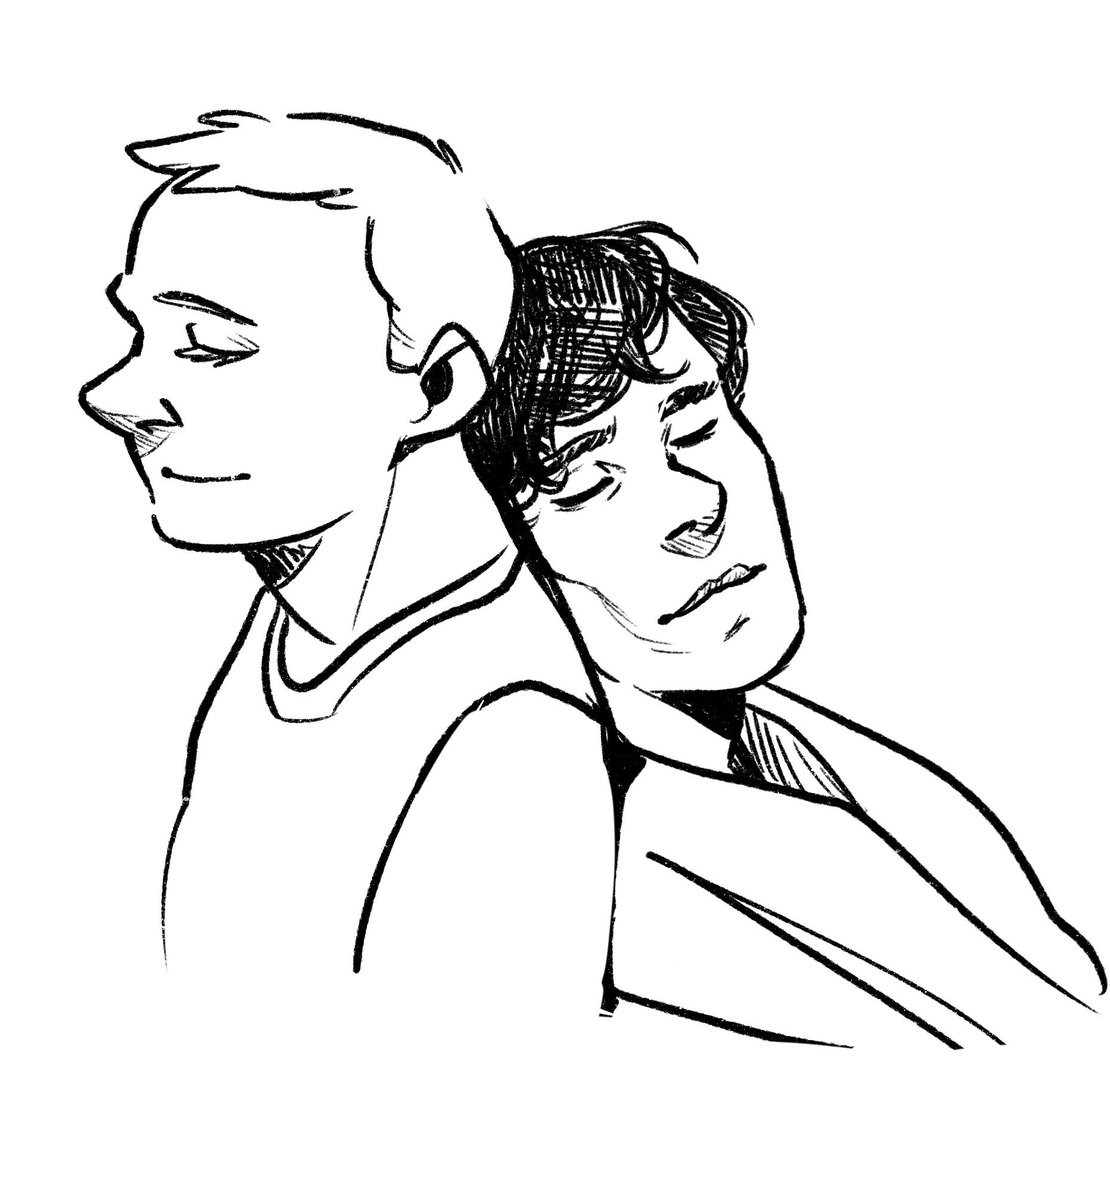 Glad I didn't forget how I was drawing them
#johnlock 